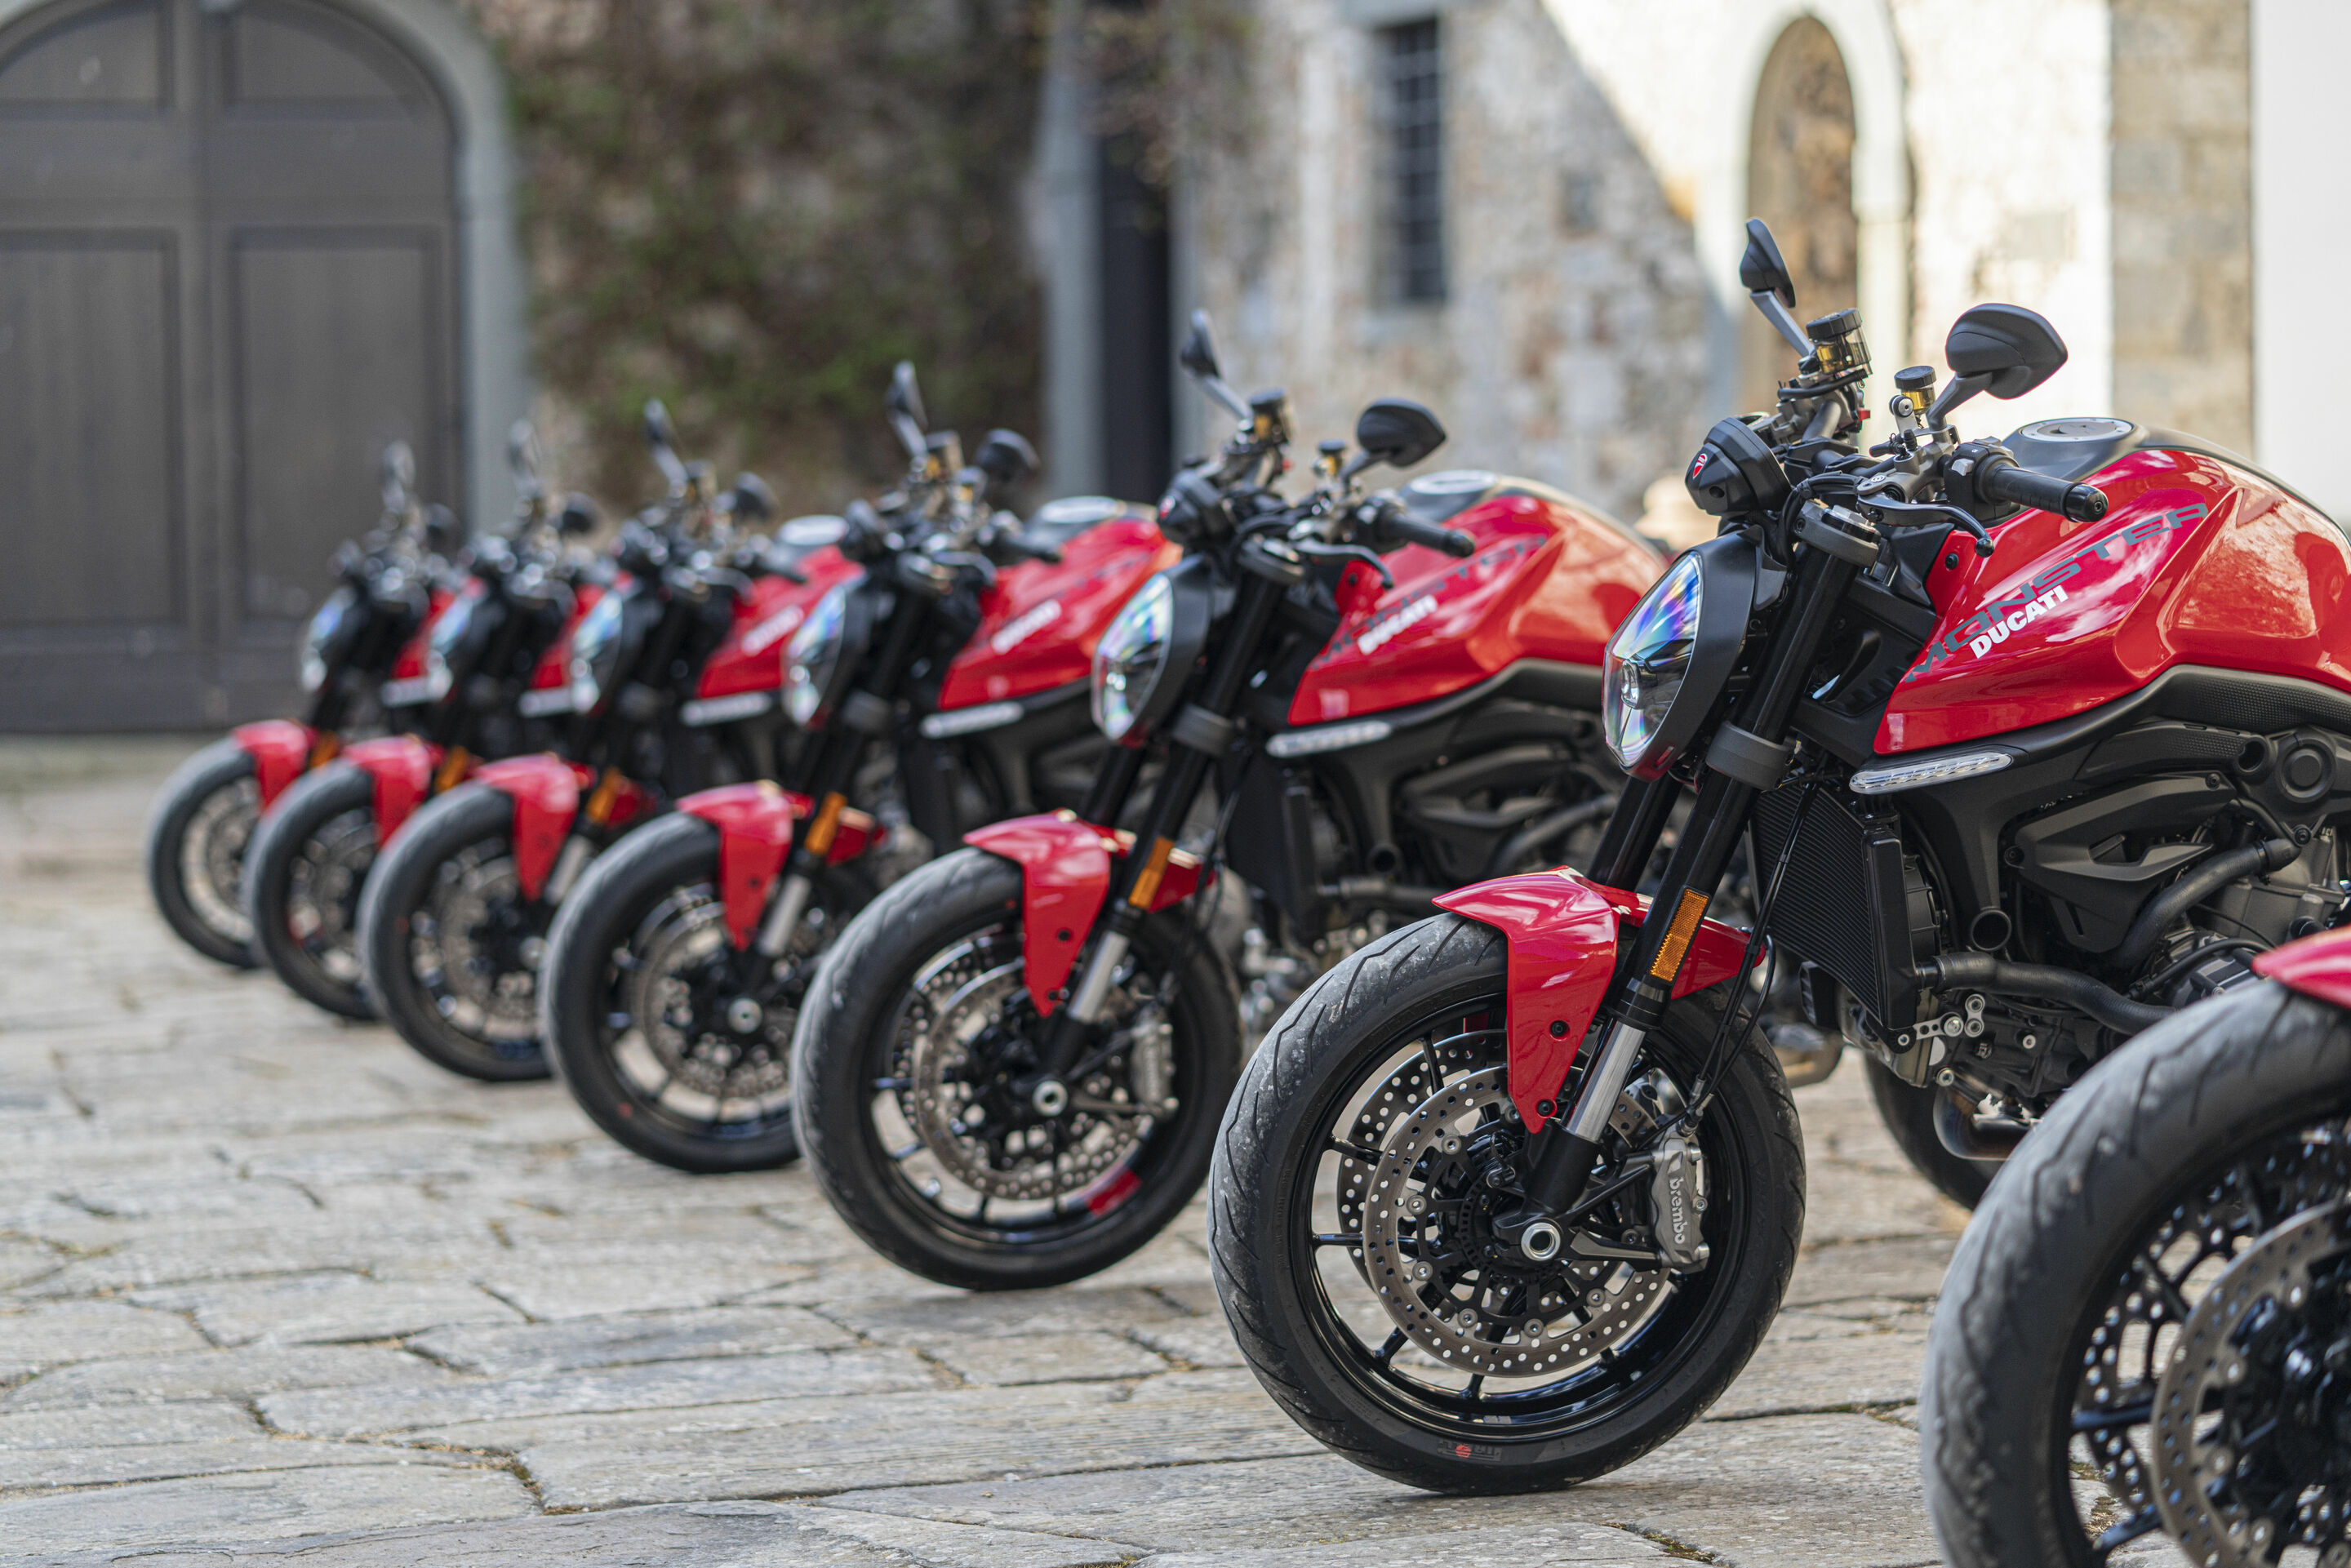 Ducati announces deliveries, revenue, and operating profit for the first half of 2022